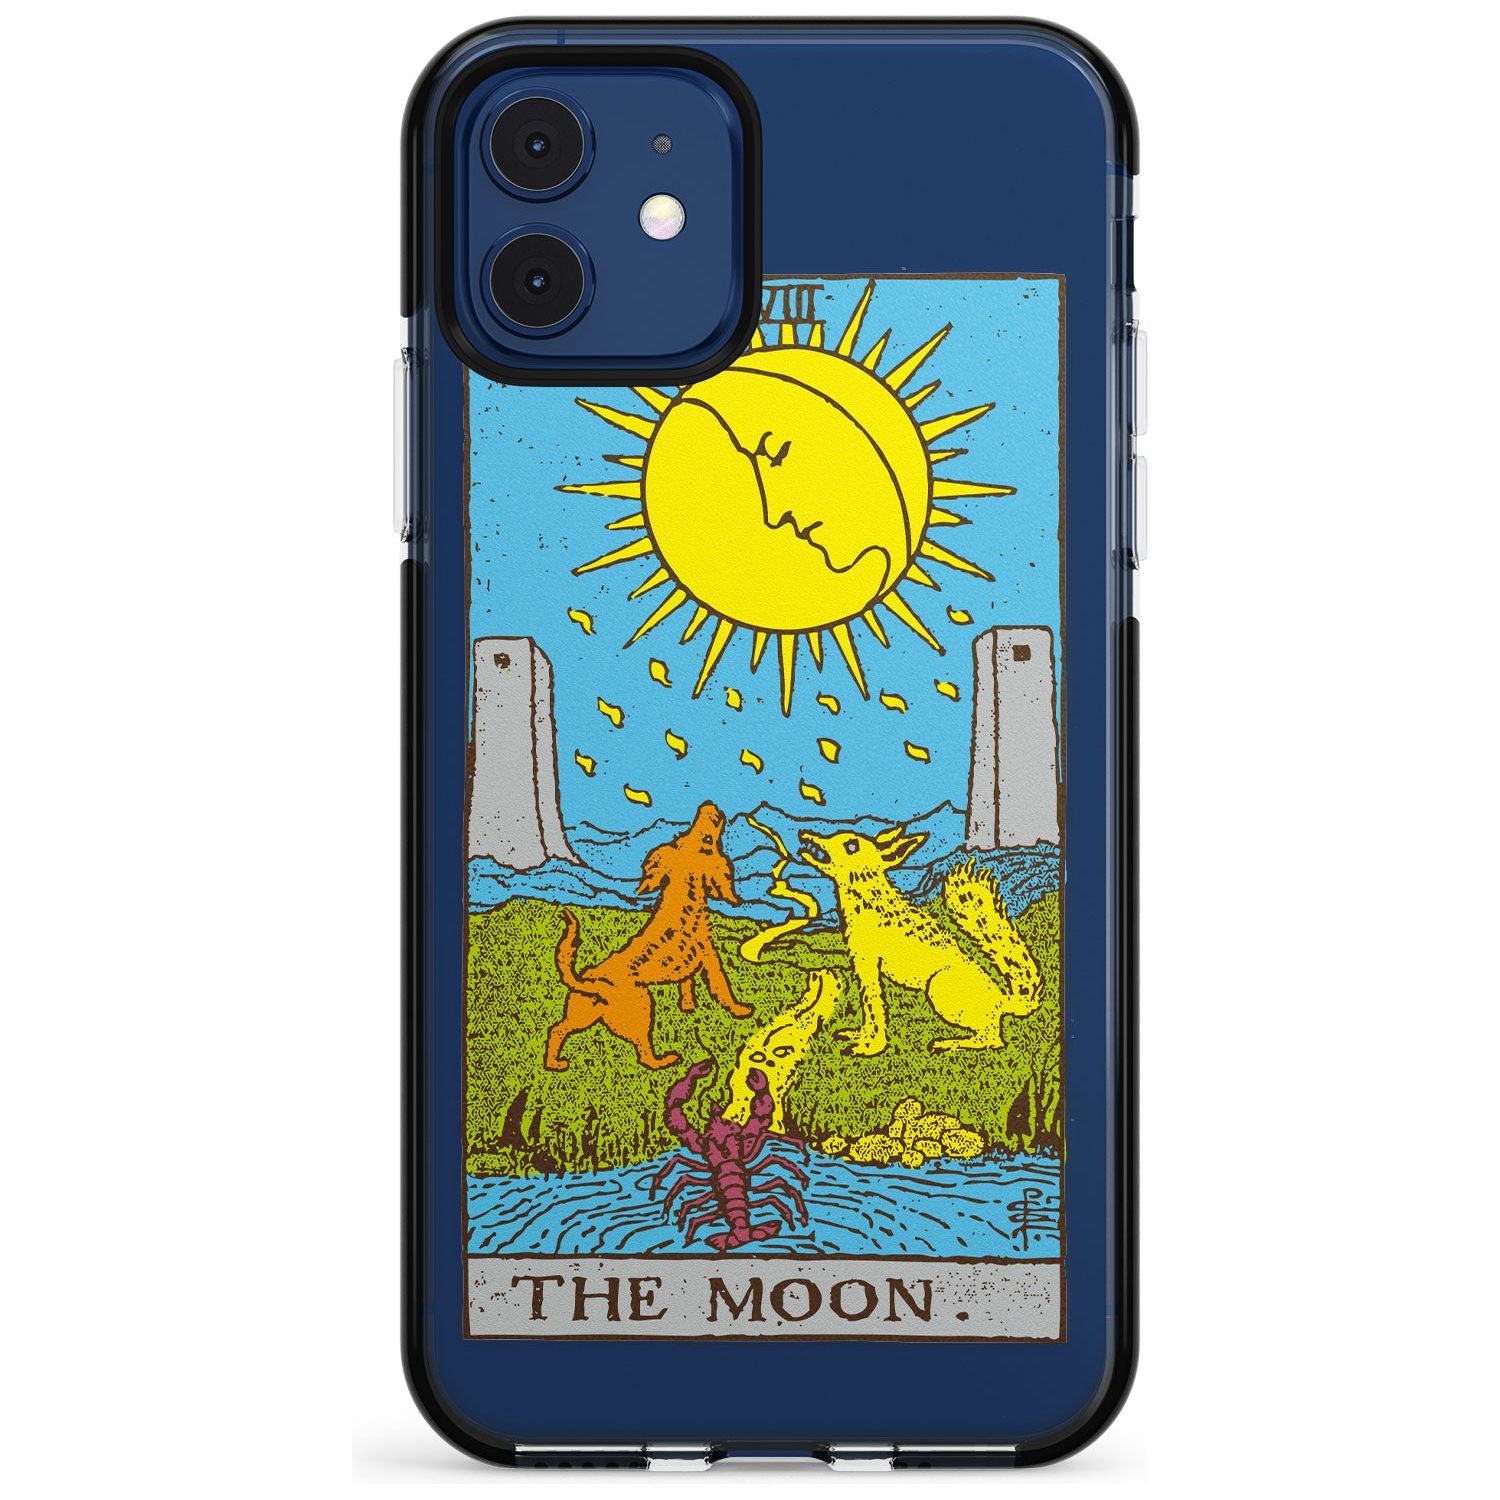 The Moon Tarot Card - Colour Pink Fade Impact Phone Case for iPhone 11 Pro Max